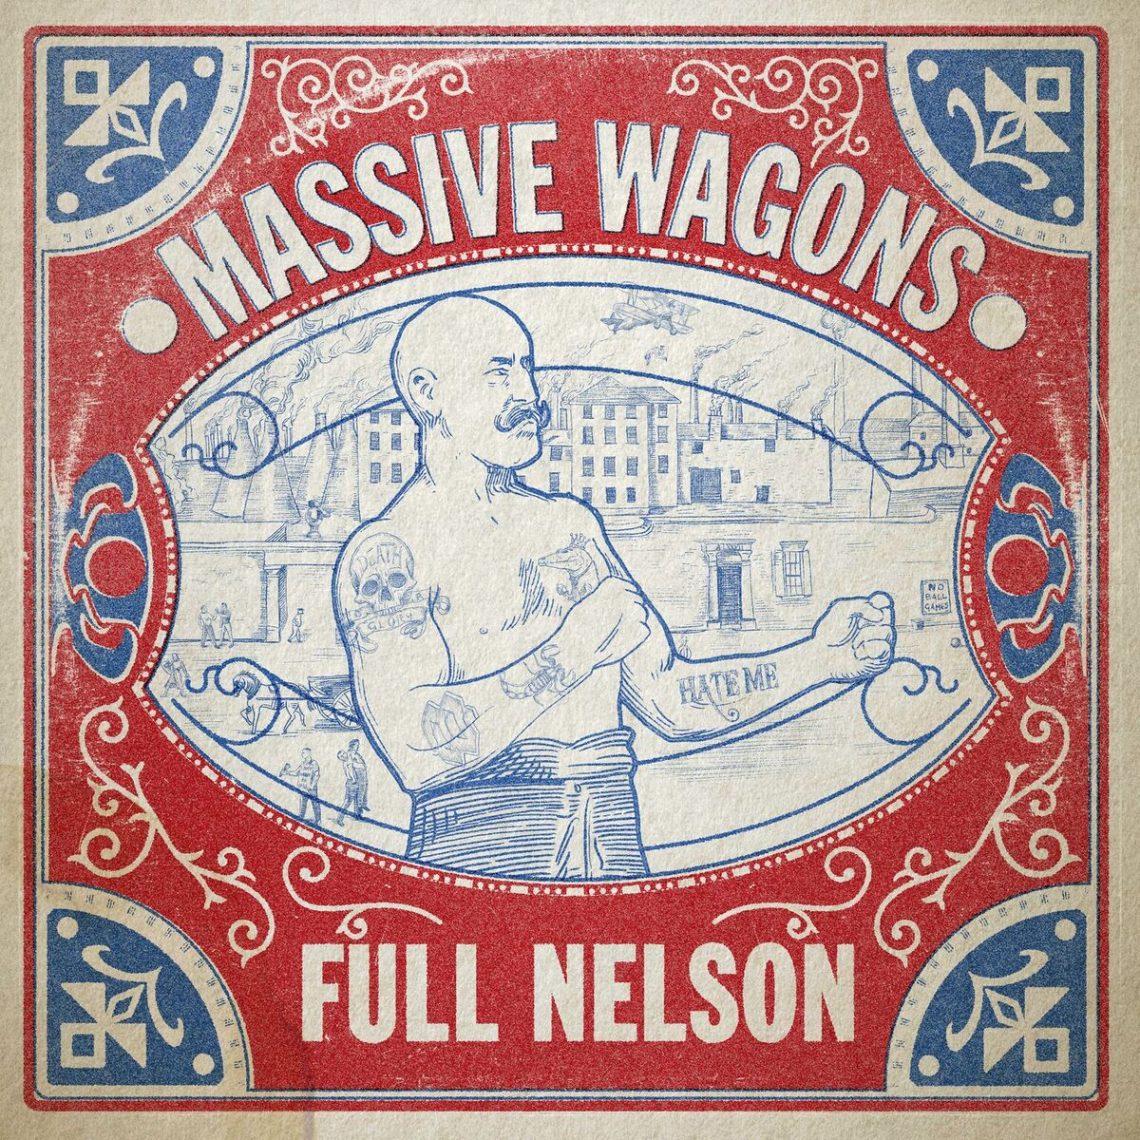 Massive Wagons – New Album “Full Nelson” #12 In The Mid-Week Charts!